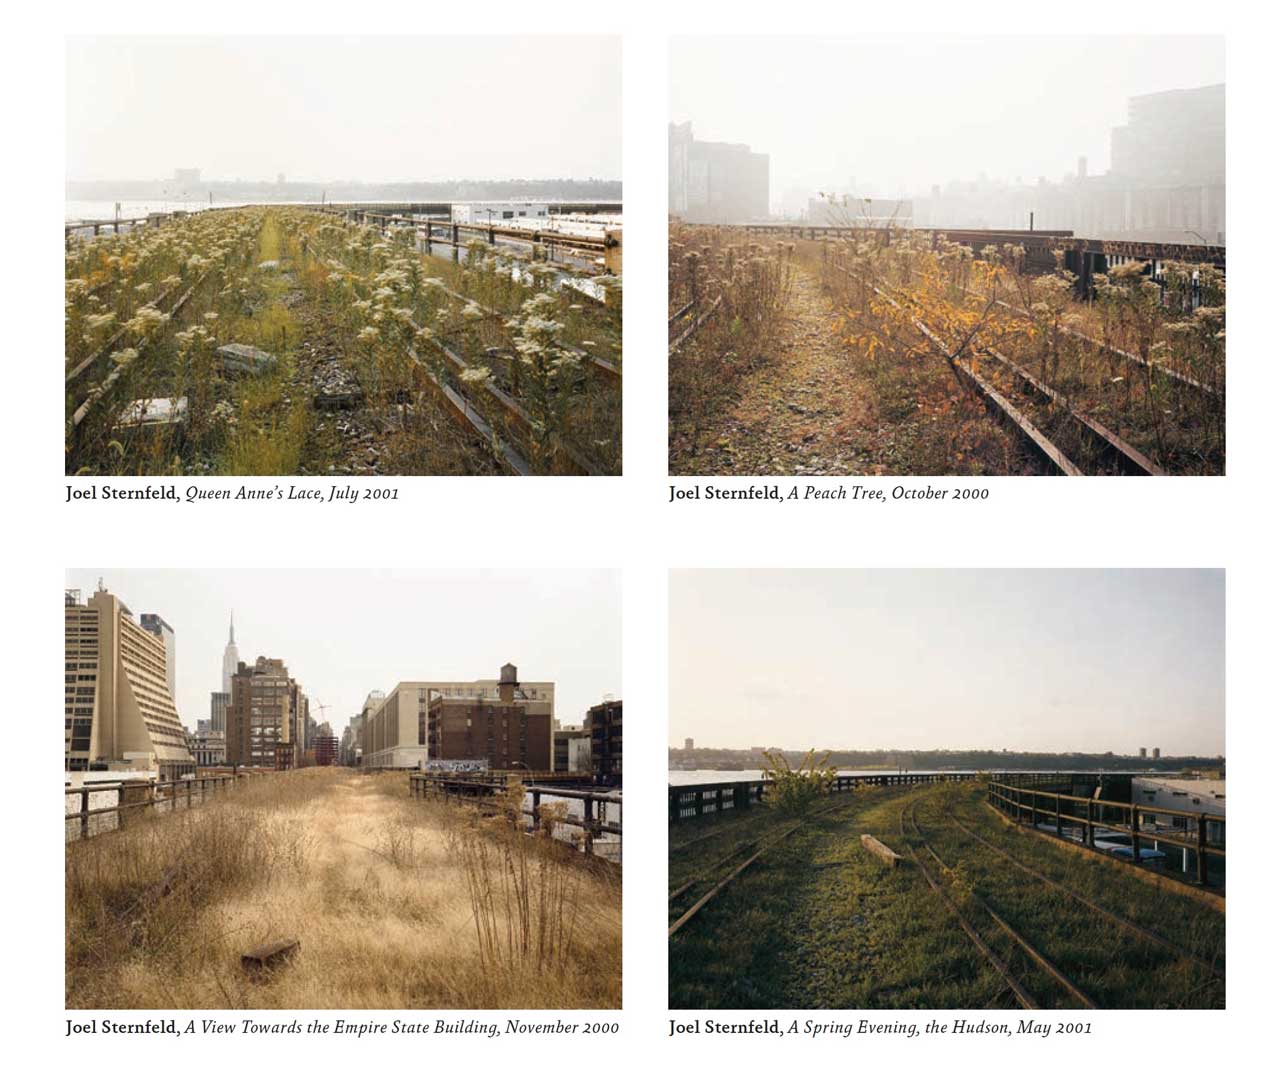 Images of the abandoned High Line with wild grasses and plants growing between the old railroad tracks